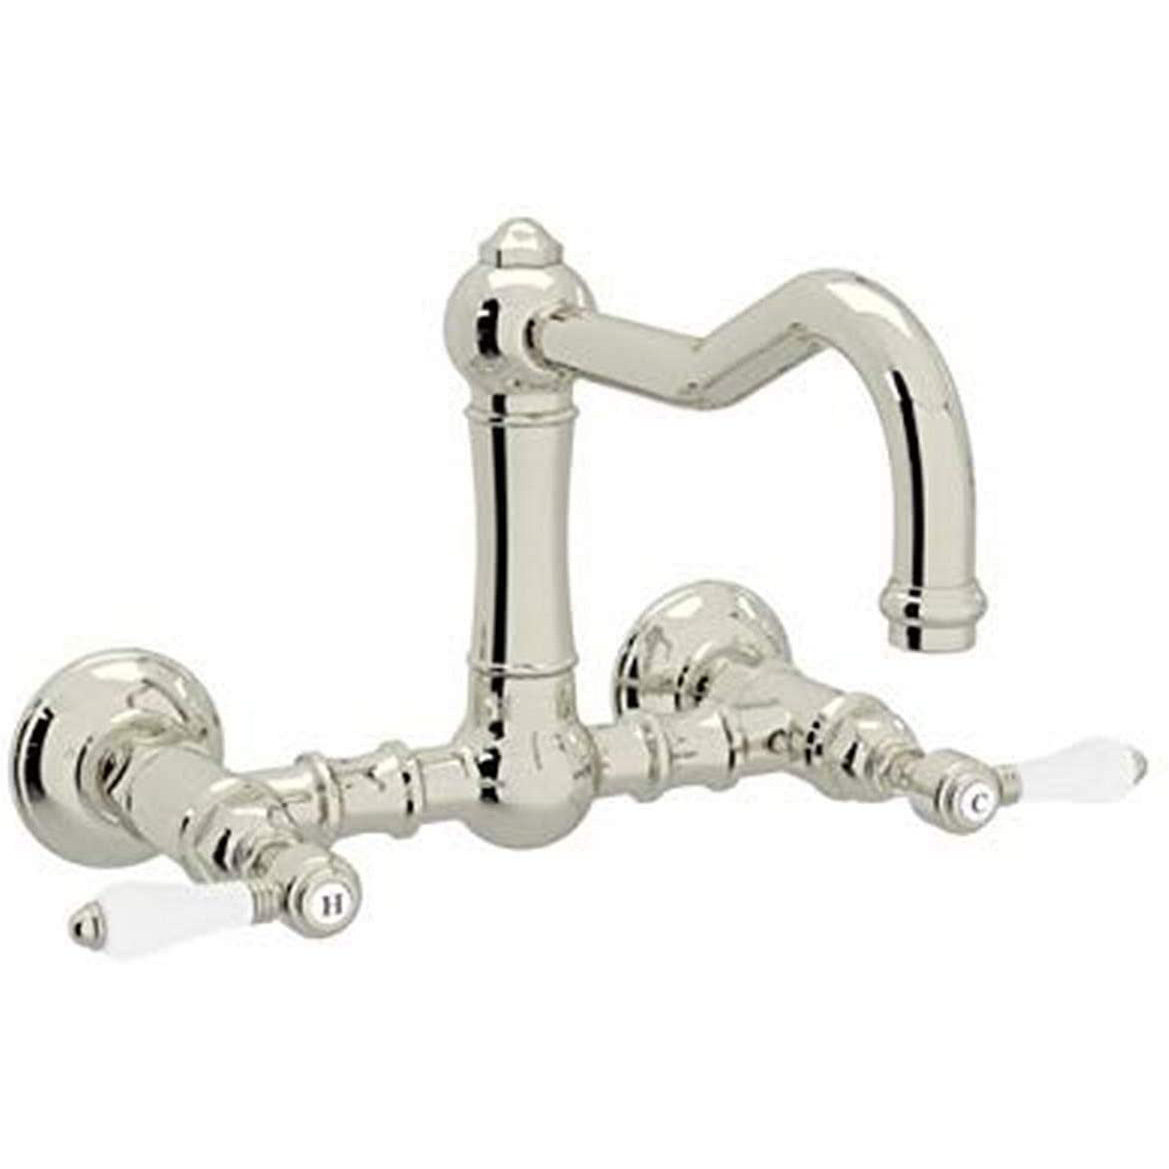 Country Bridge Faucet w/Porcelain Handles in Polished Nickel